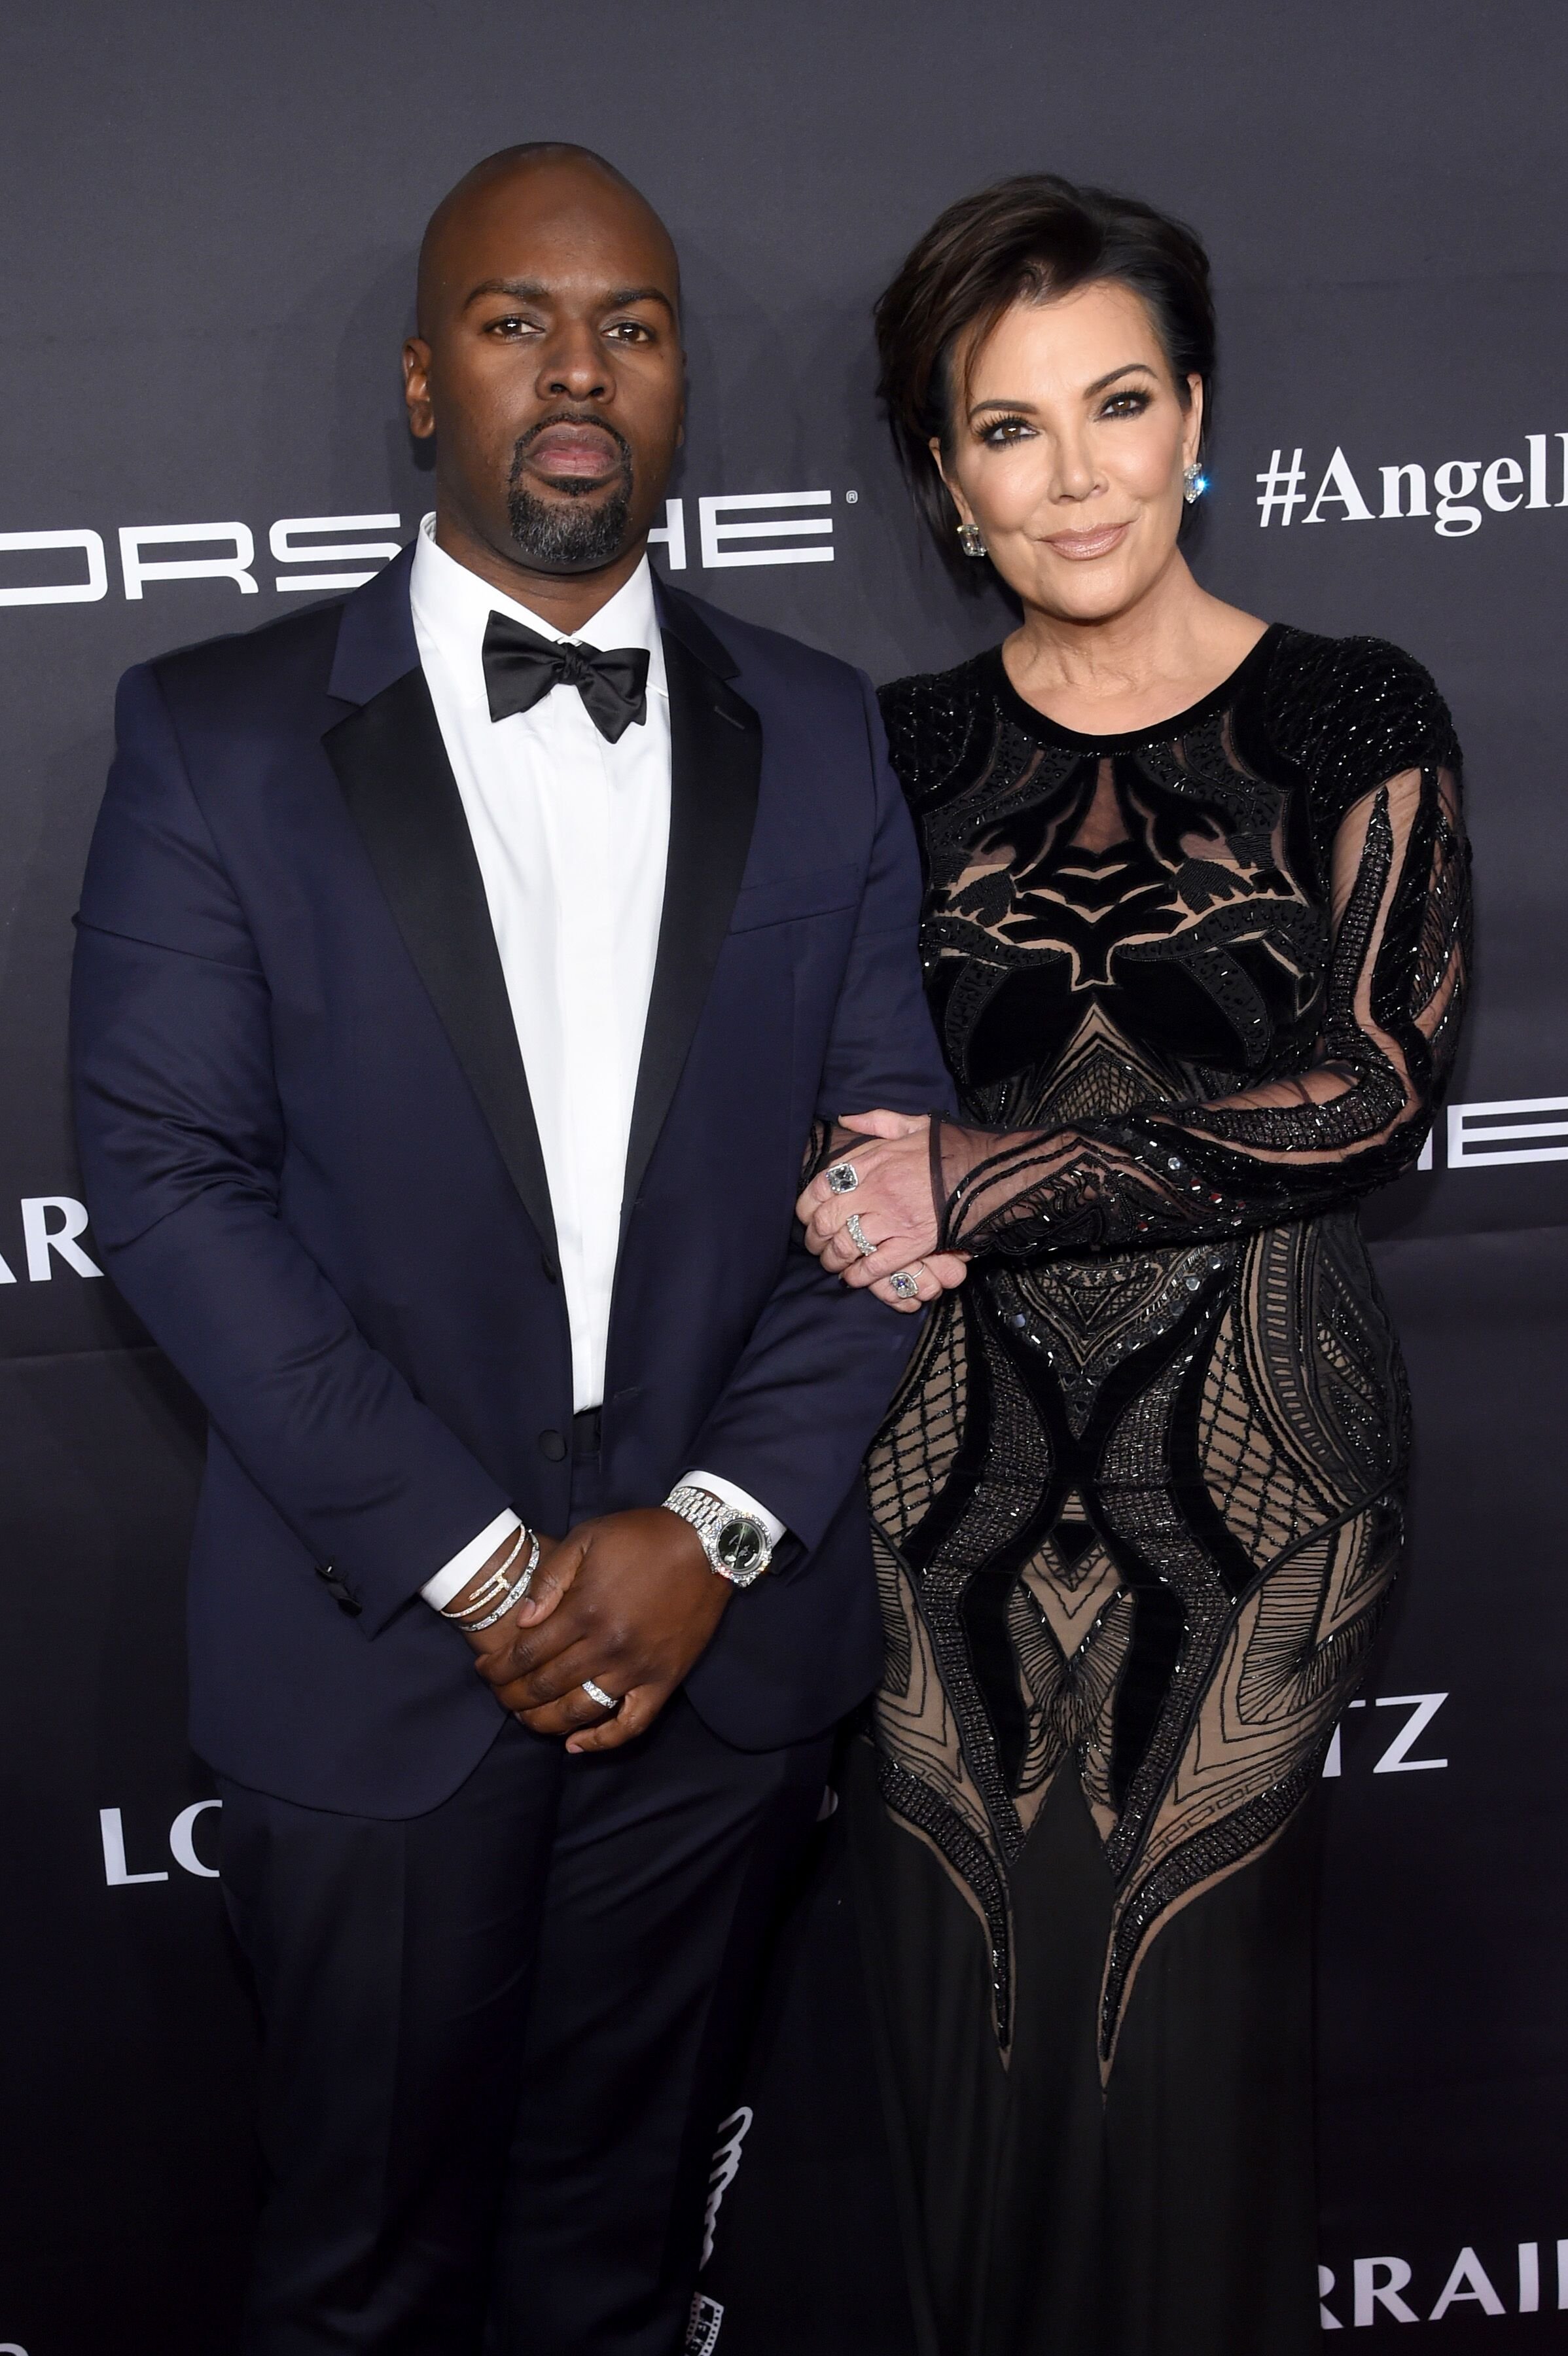 Kris Jenner and boyfriend Corey Gamble at the Angel Ball / Source: Getty Images